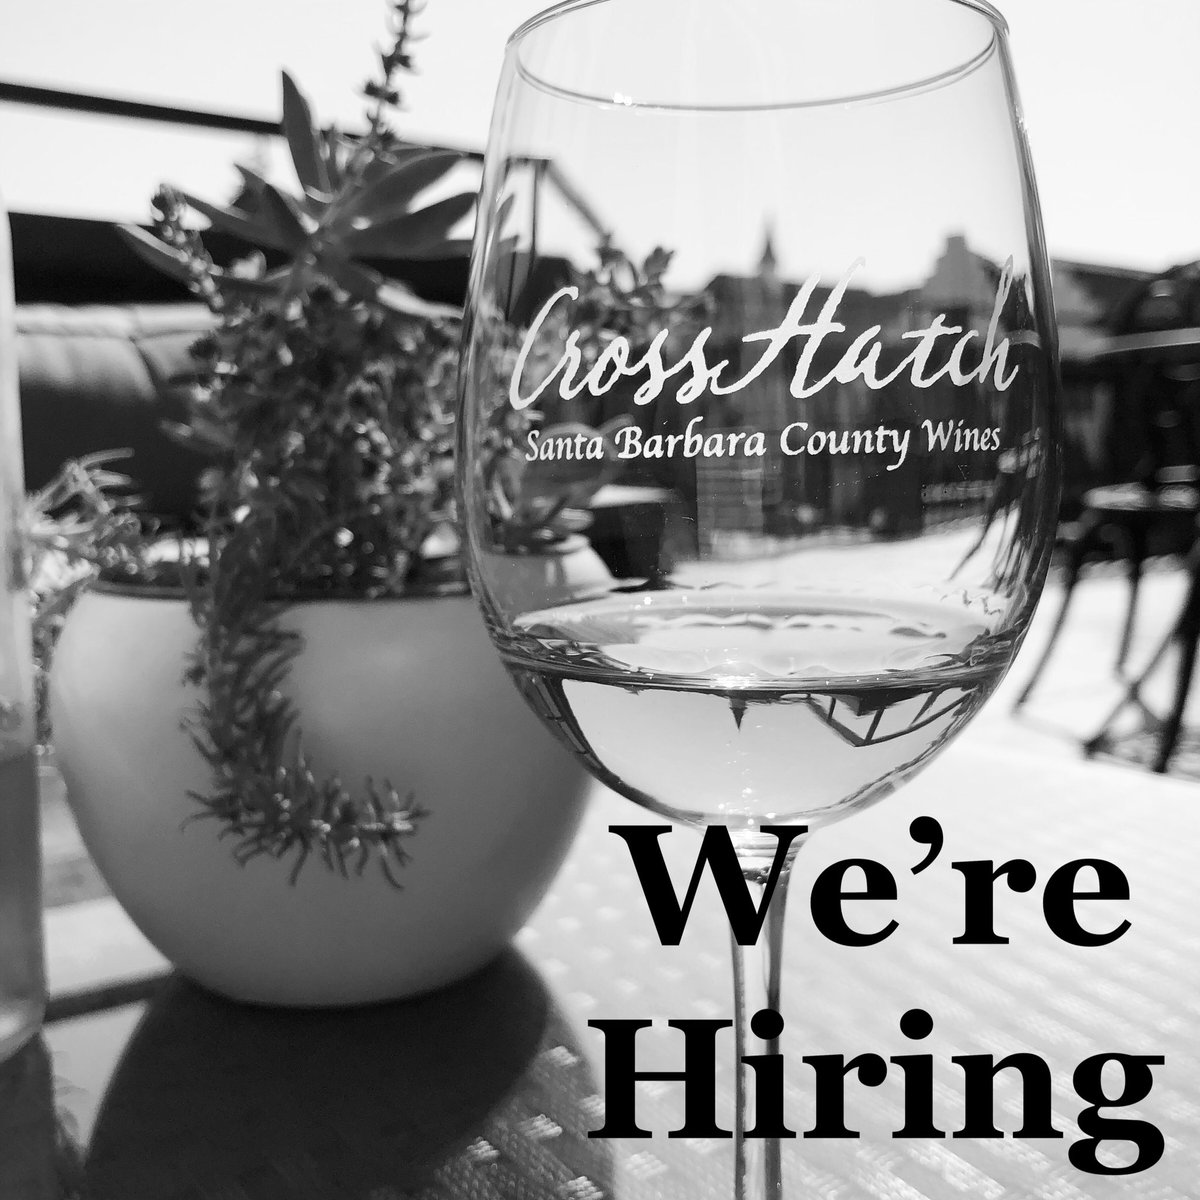 CrossHatch Winery in Solvang, CA is looking for a Tasting Room and Marketing Manager. Stop by to drop off your resume or email us at the link below. #winejob #winery #winelover #SolvangUSA 
Bit.ly/CHTRMGR